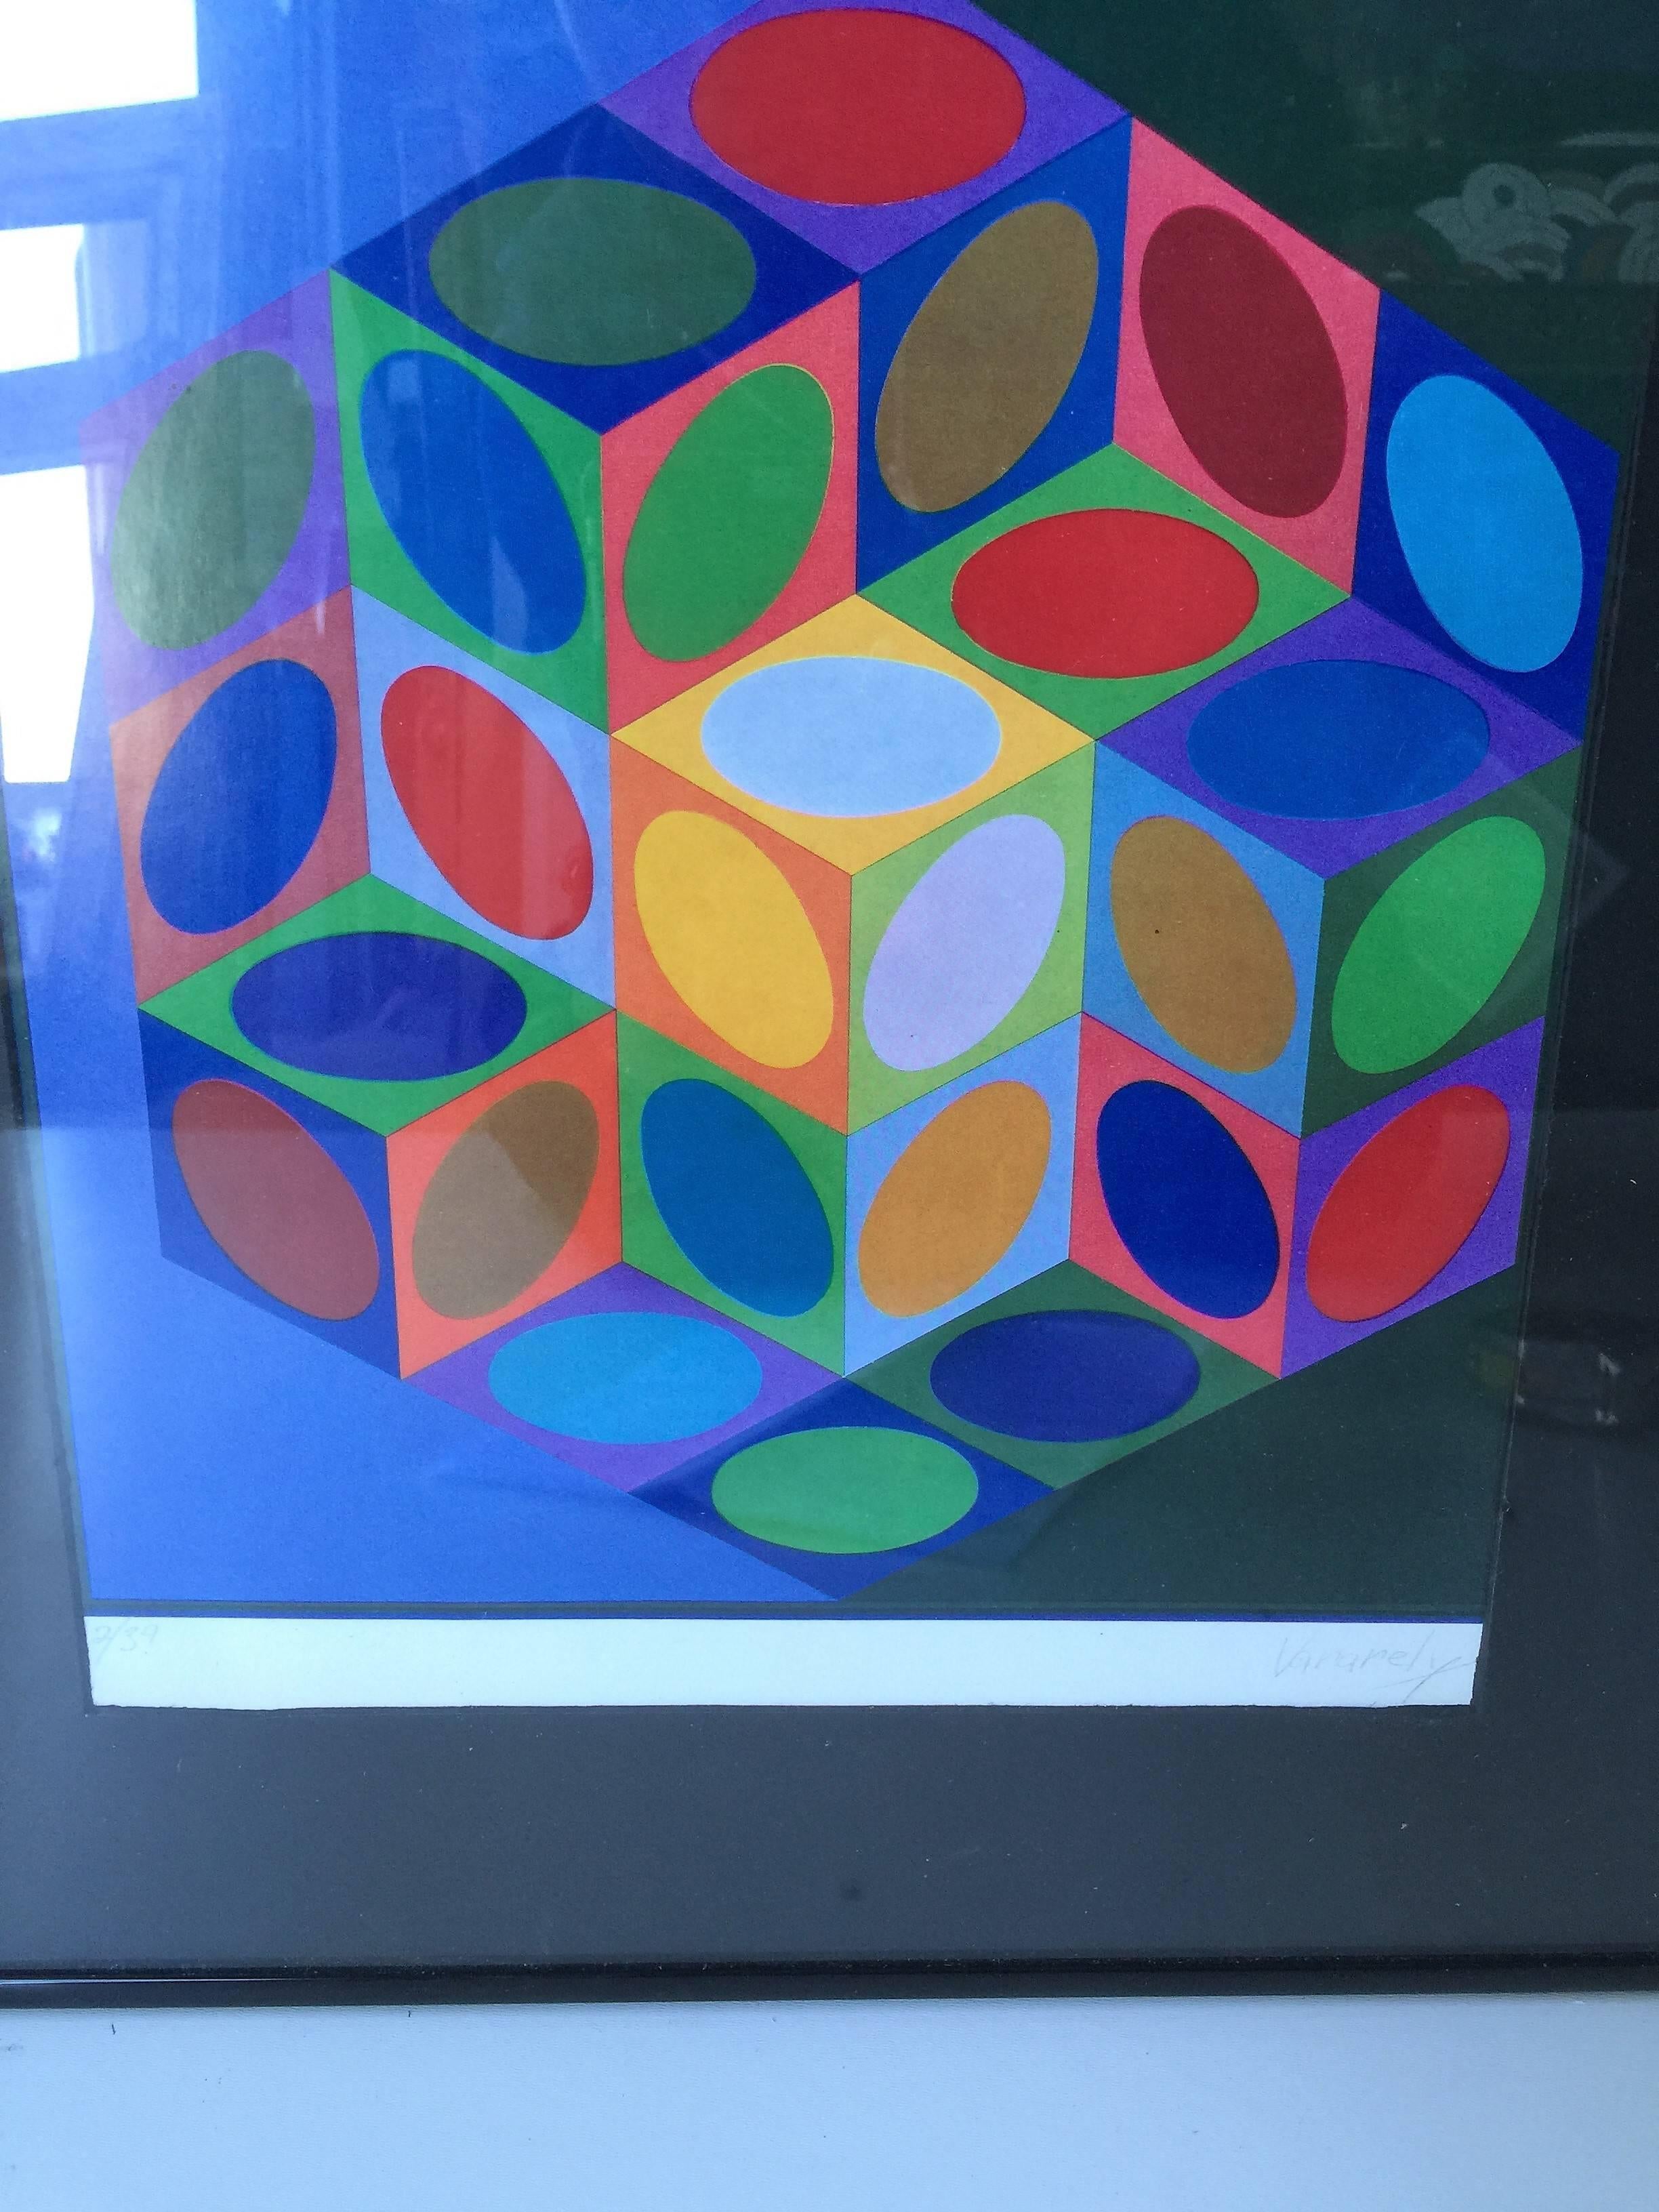  Series 1977 Victor Vasarely Colorful Optic Silkscreen In Excellent Condition For Sale In Mount Penn, PA